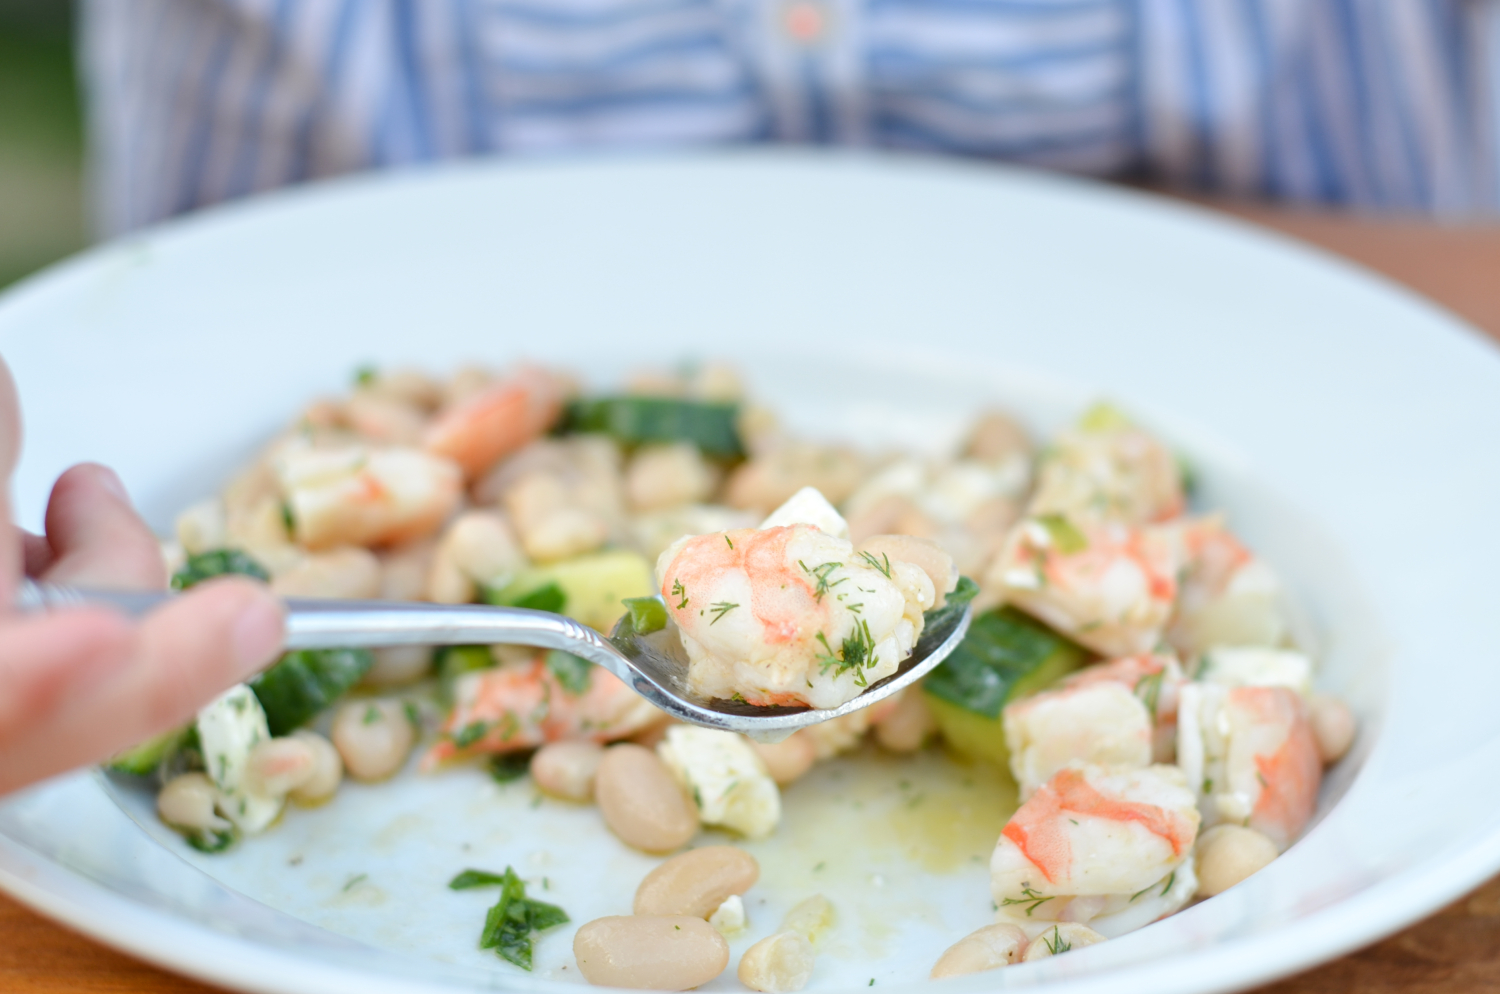 An easy, healthy, make-ahead cucumber shrimp salad recipe, perfect for weeknight dinner and summer entertaining!